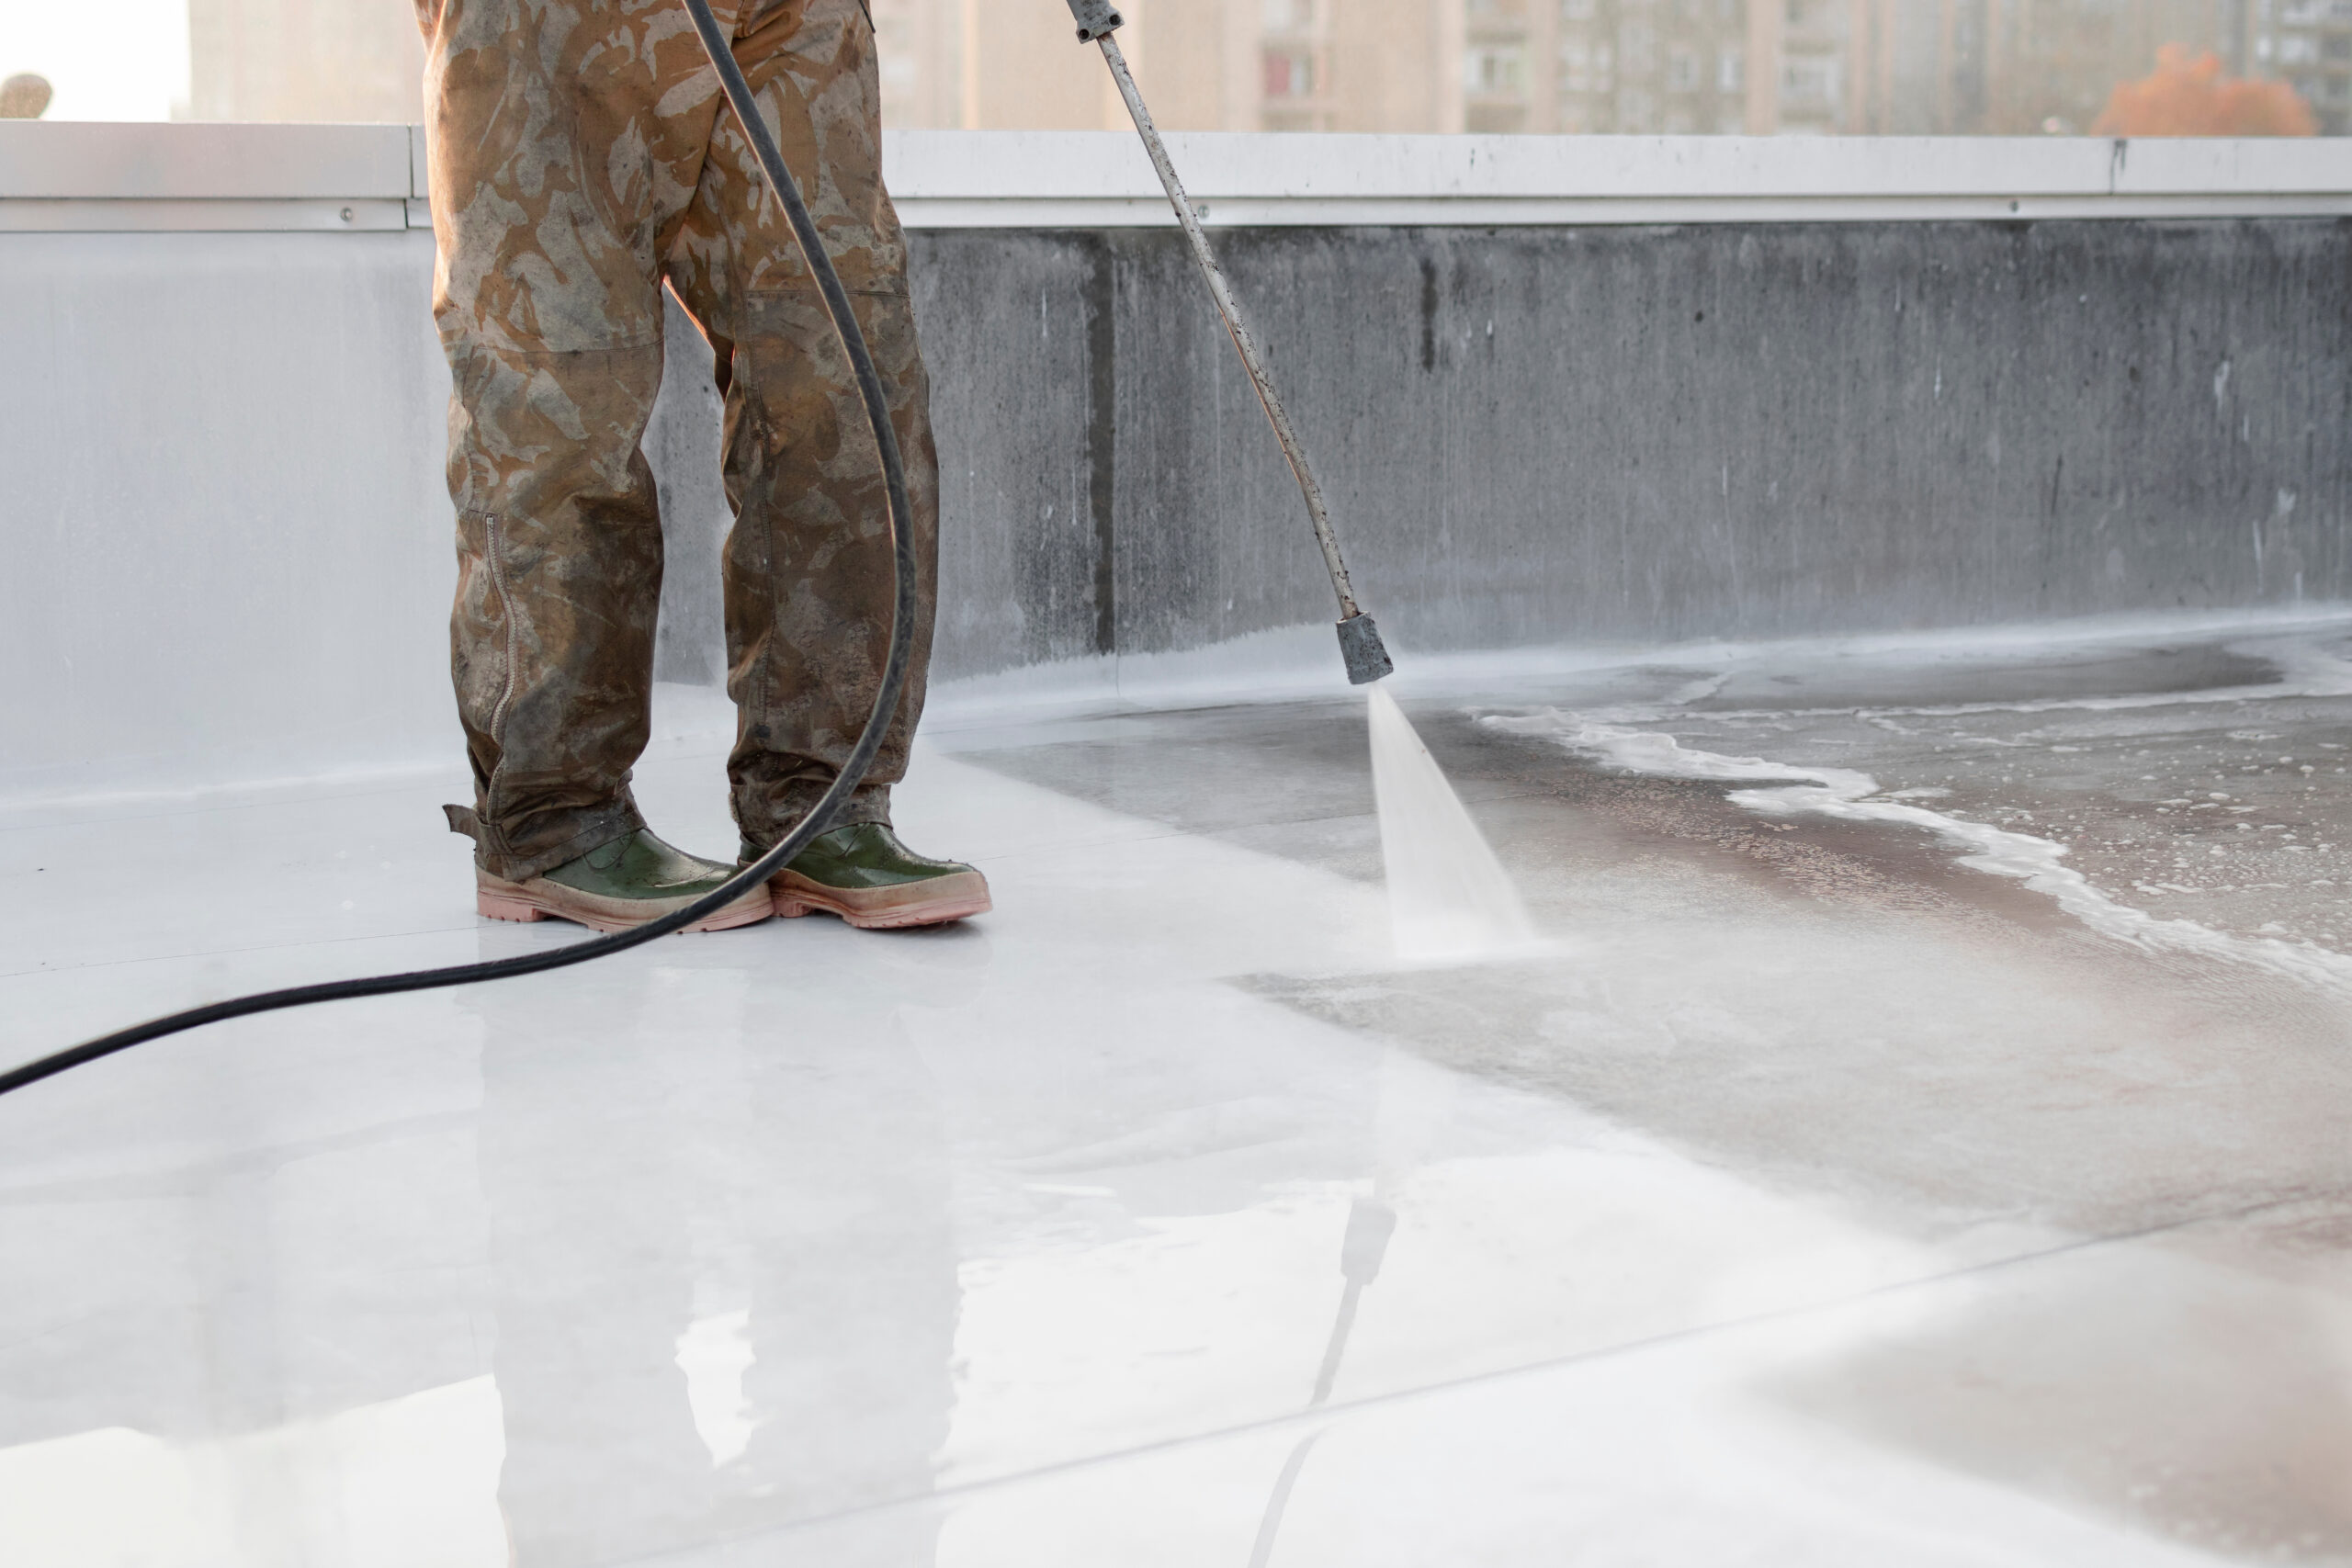 A man wearing camoflauge pants is using a pressure washer on a low setting to clean a white flat roof